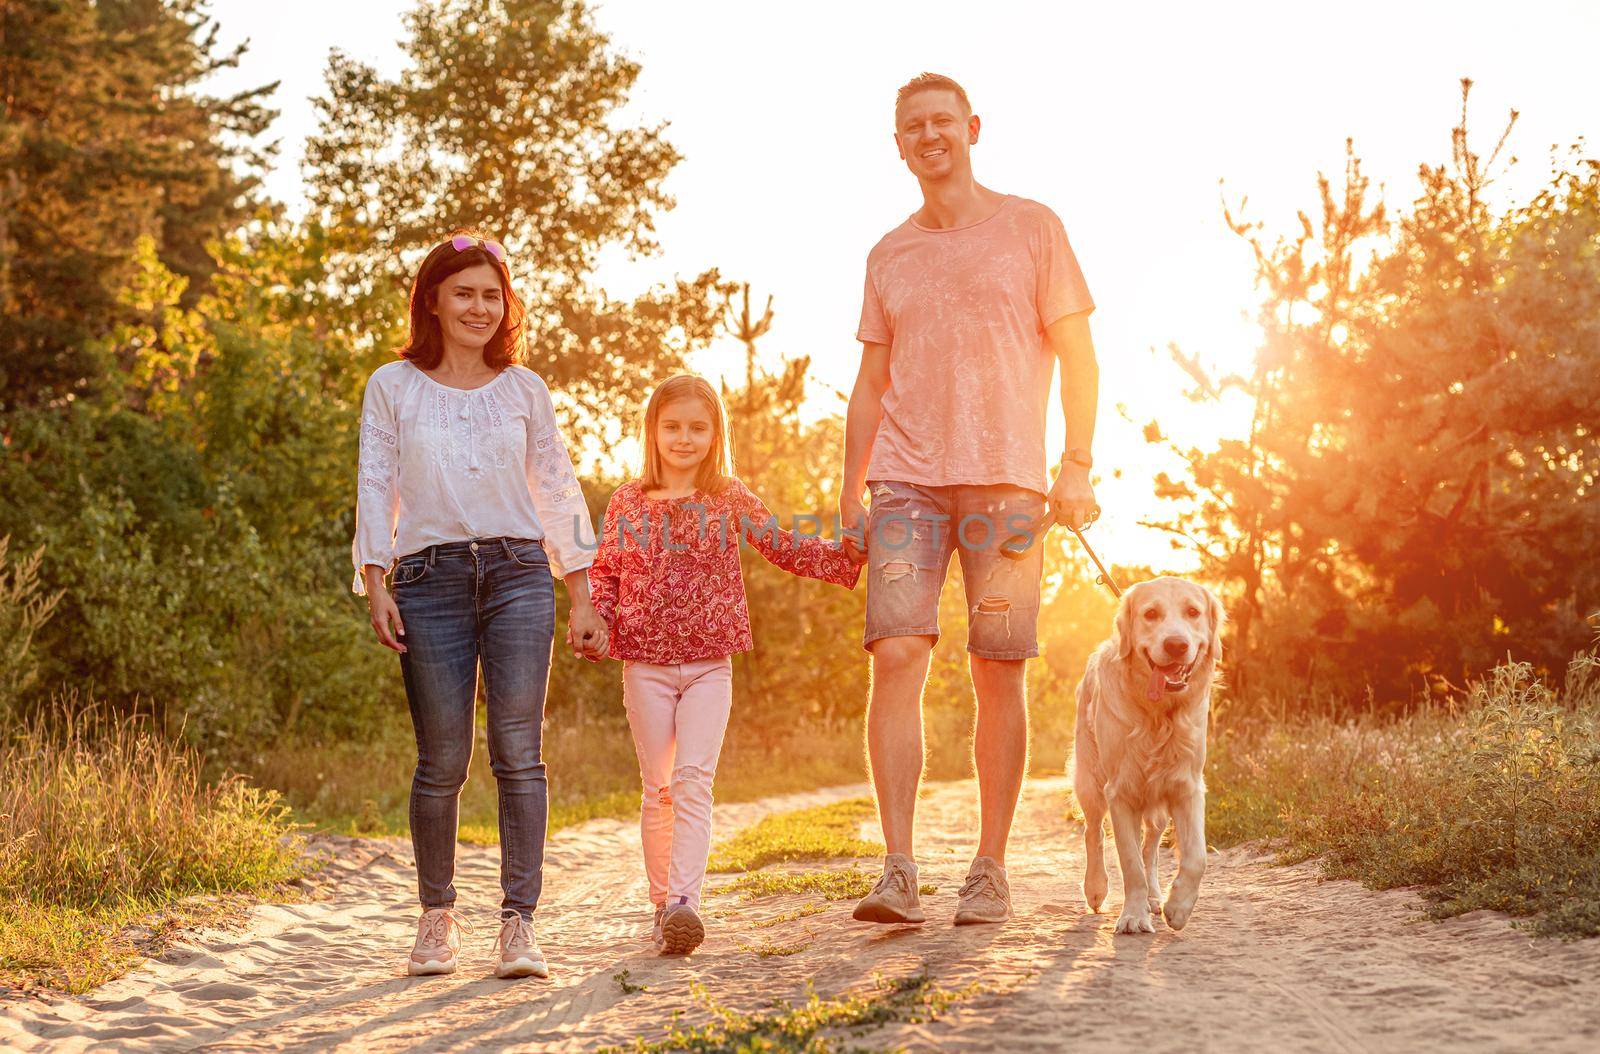 Family with dog walking outdoors at sunset by tan4ikk1